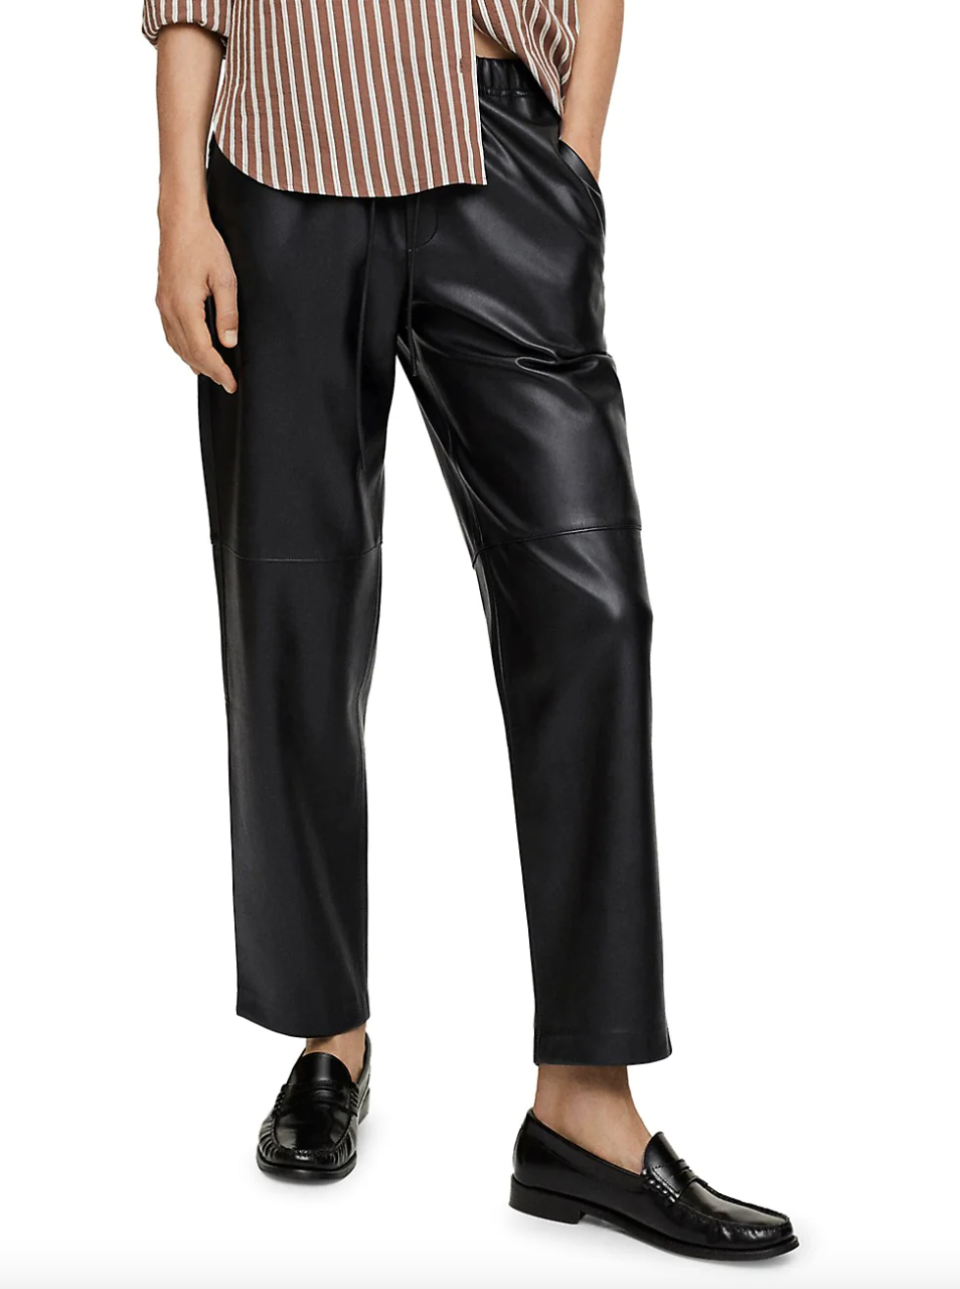 black Mango Leather Effect Drawstring Pants and black loafers and striped shirt